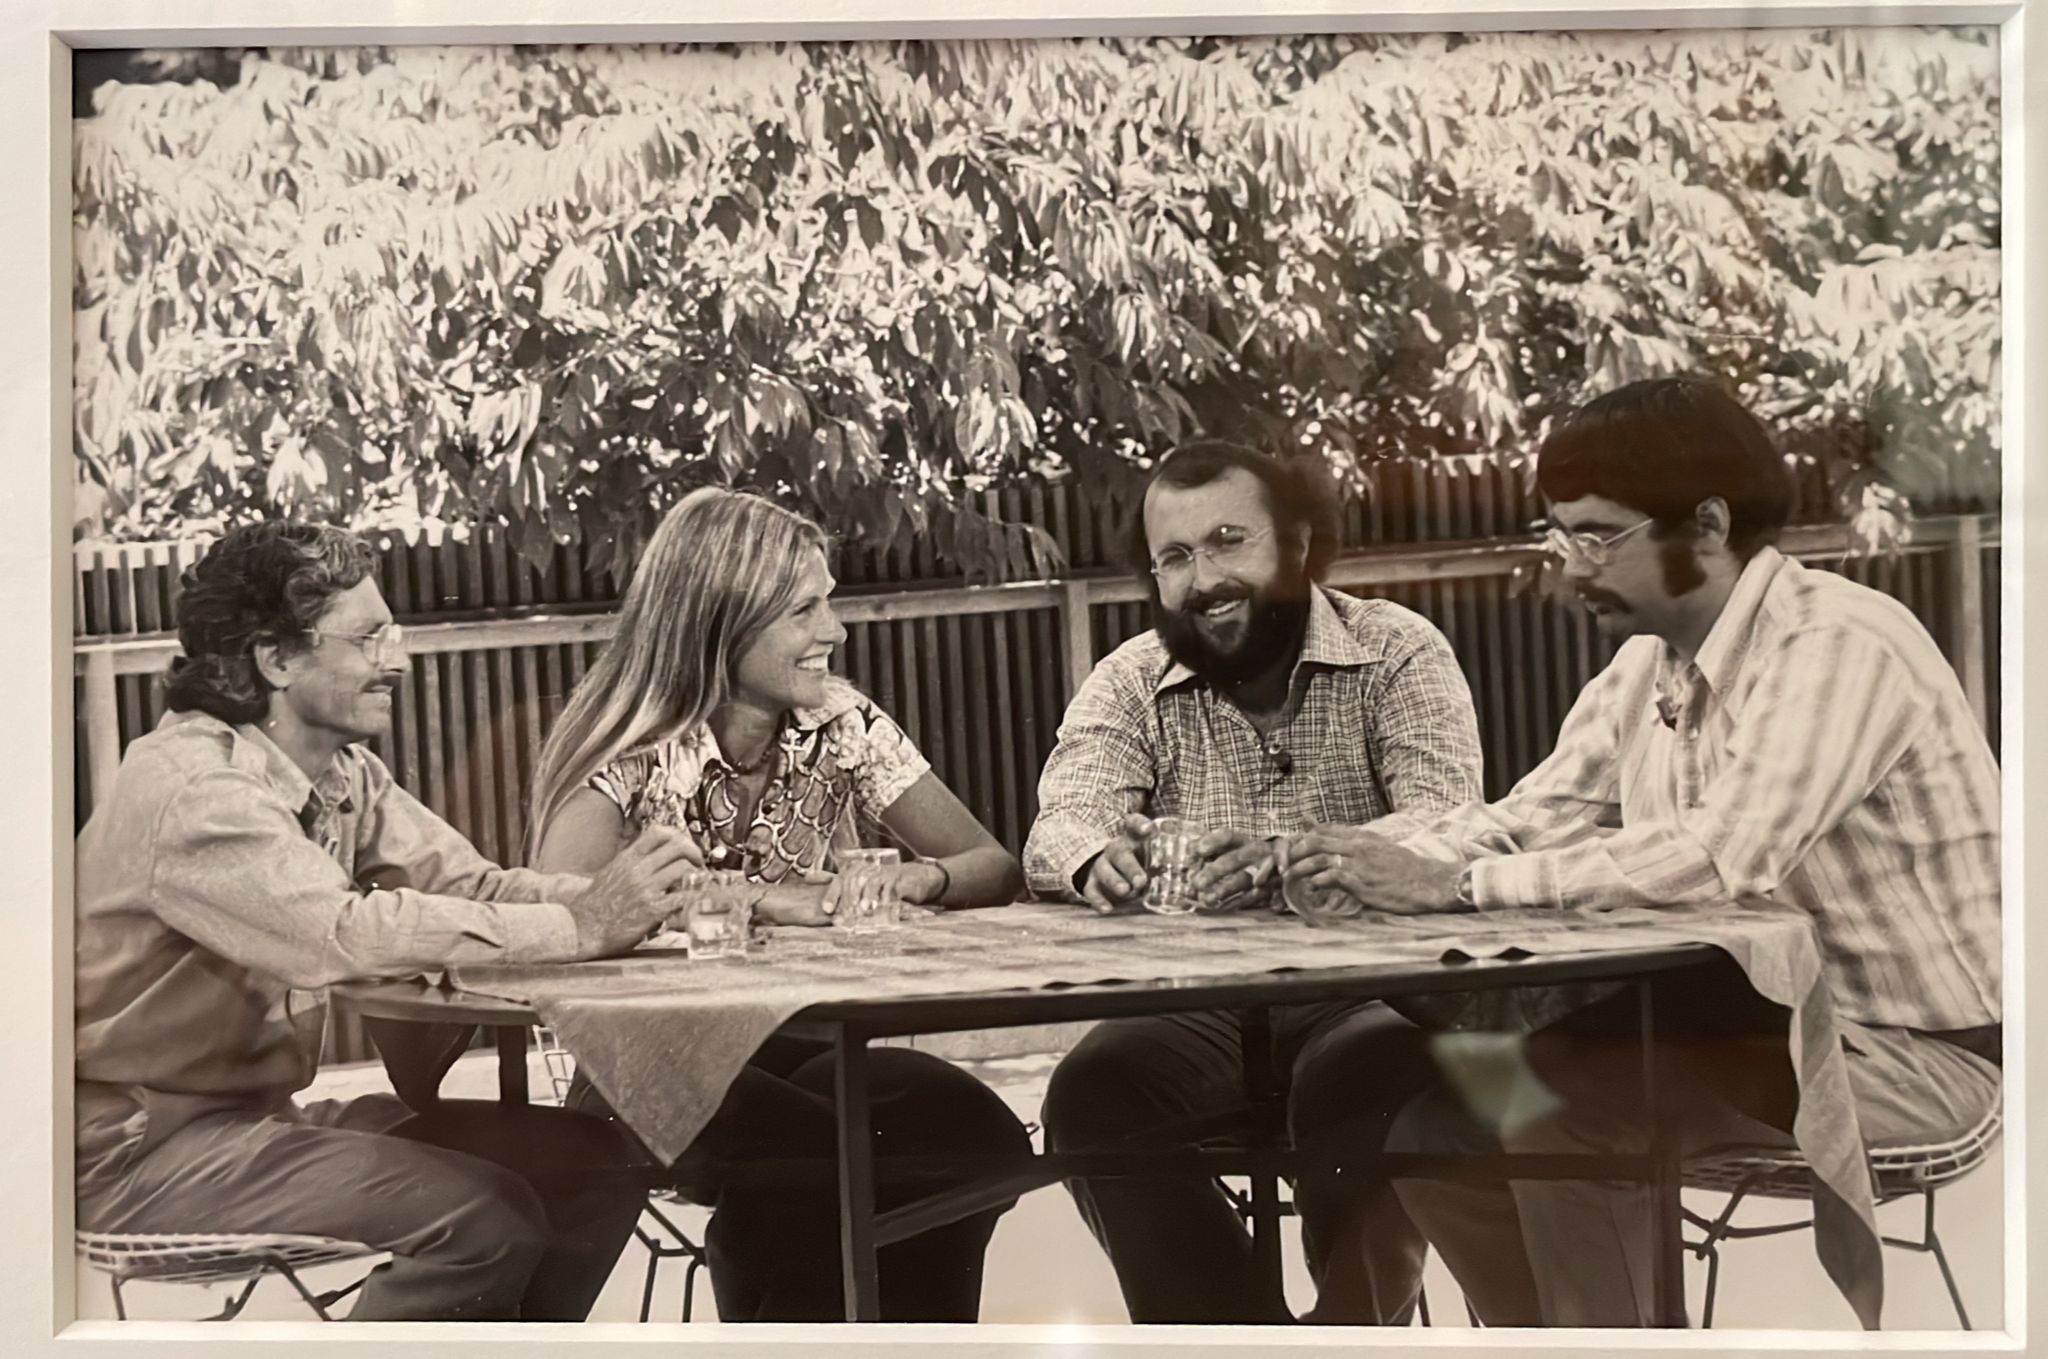 A black and white photo shows four people, including Andrew Stern, seated around a table outdoors, conversing and smiling. The group includes a woman and three men, all casually dressed, appearing to enjoy a relaxed moment together. The background features lush greenery typical of Berkeley Journalism gatherings.